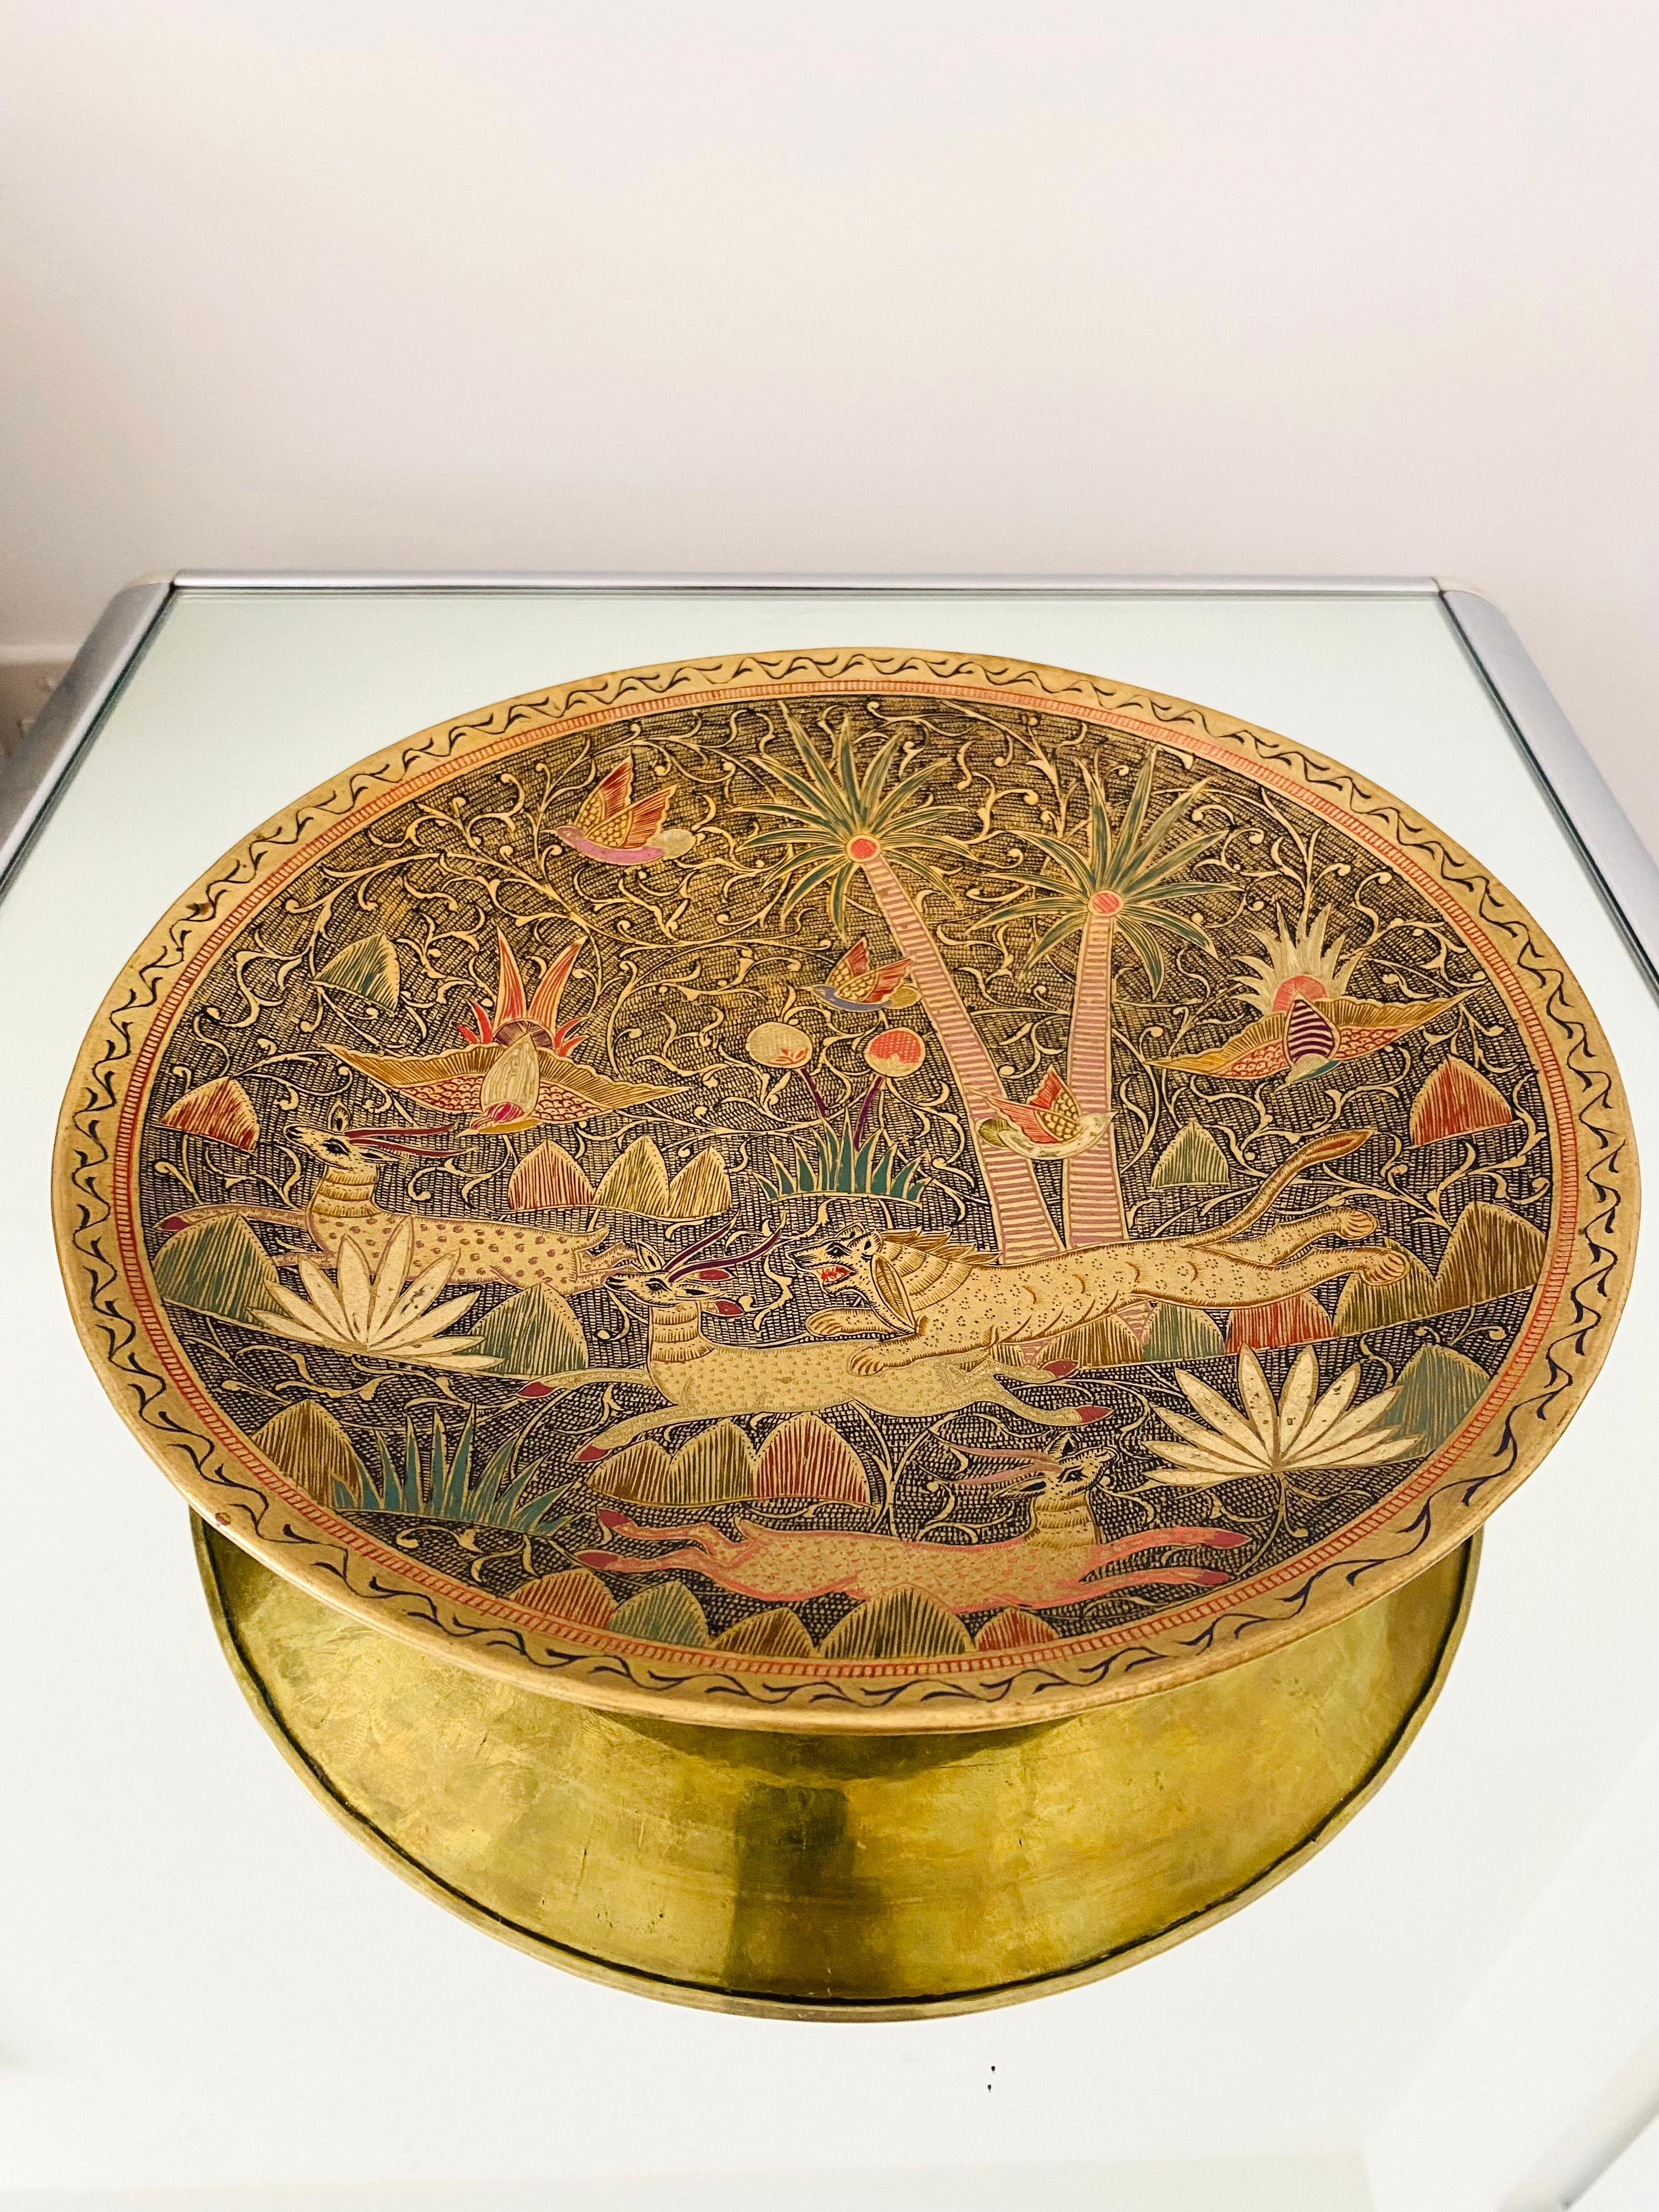 Decorative brass plate or vide-poche dish with engraved scene featuring exotic animals and plants and islamic scroll motifs along the border. The dish features hand-painted enameled inlays in hues of red, green, brown, and black. This is a hand